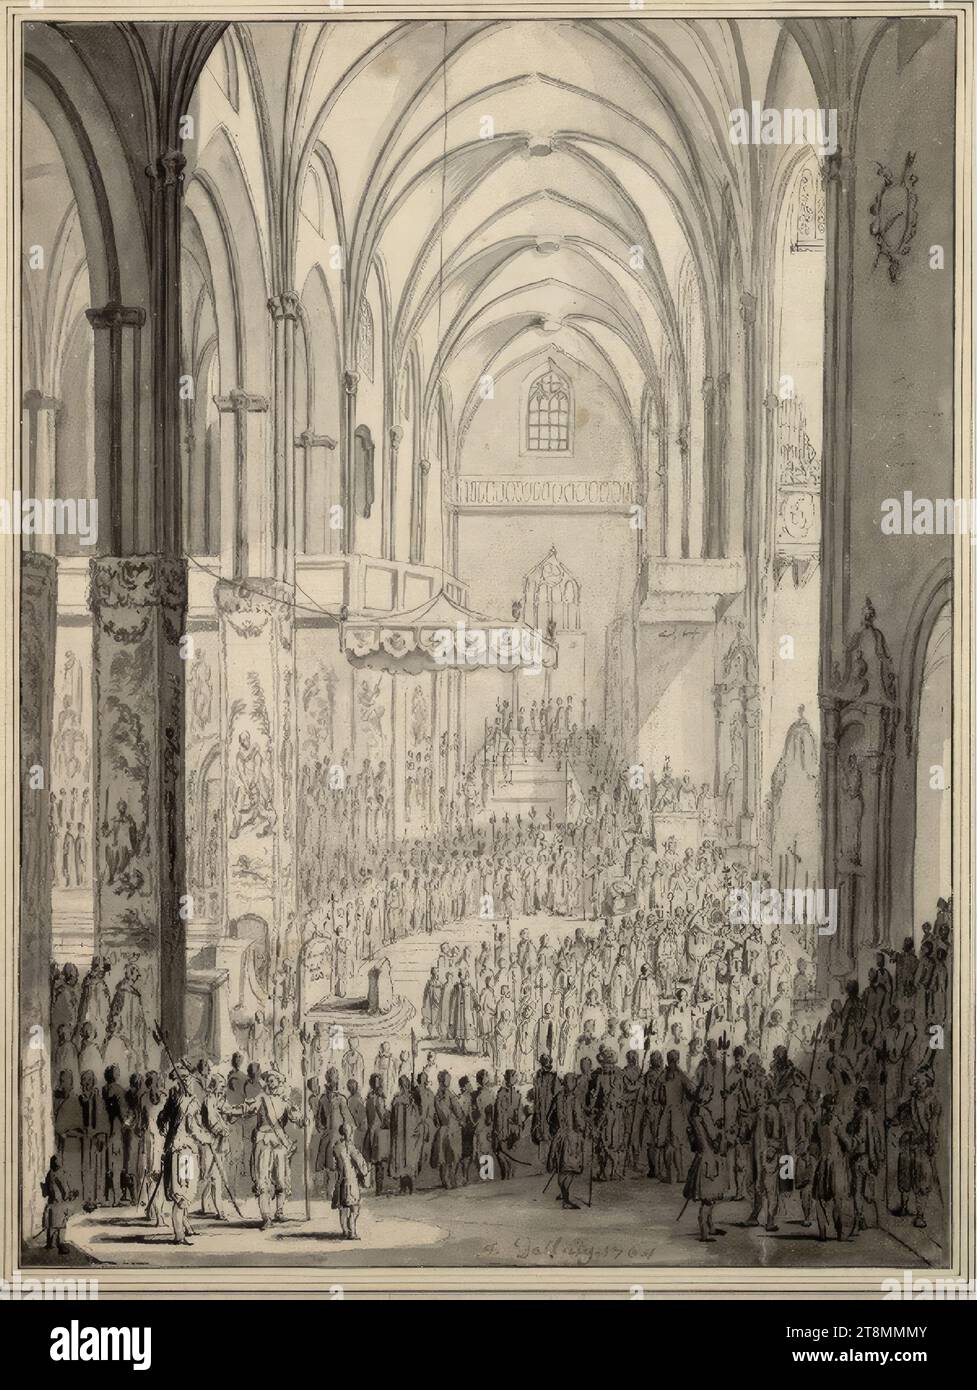 The coronation of Archduke Joseph as Roman king in the cathedral in Frankfurt, Alexander Johann Dallinger von Dalling (Vienna 1741 - 1806 Vienna), 1764, drawing, pen and brush in grey, washed, 42.5 x 31.5 cm, l.l. Duke Albert of Saxe-Teschen Stock Photo